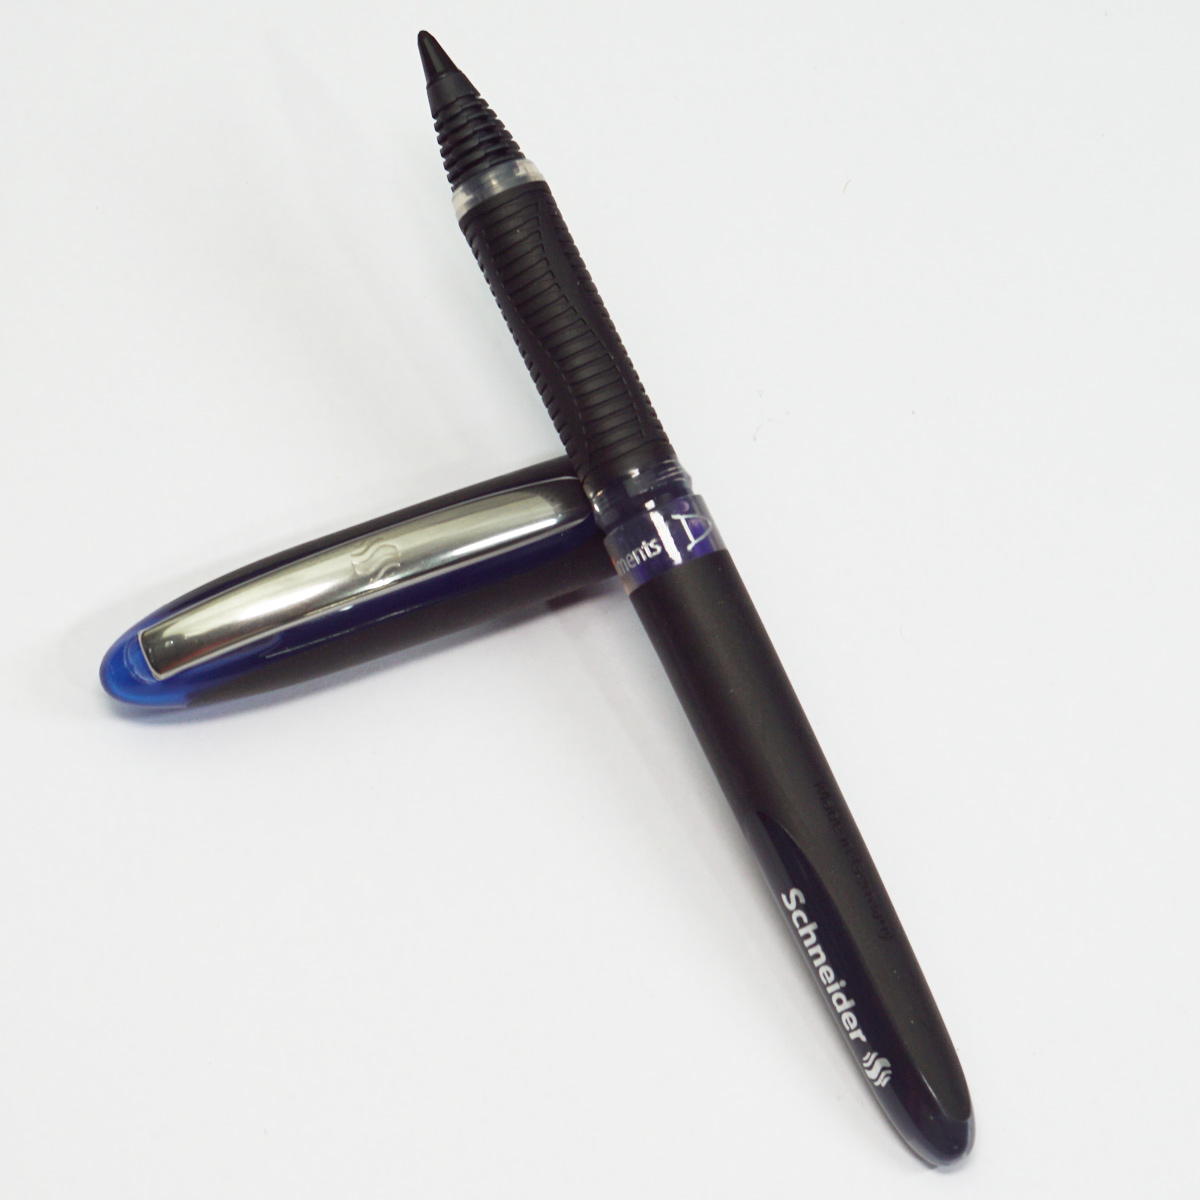 Schneider Black Color Body With Silver Clip 1.0mm Cone Tip Blue Writing Rollerball Pen SKU 23293